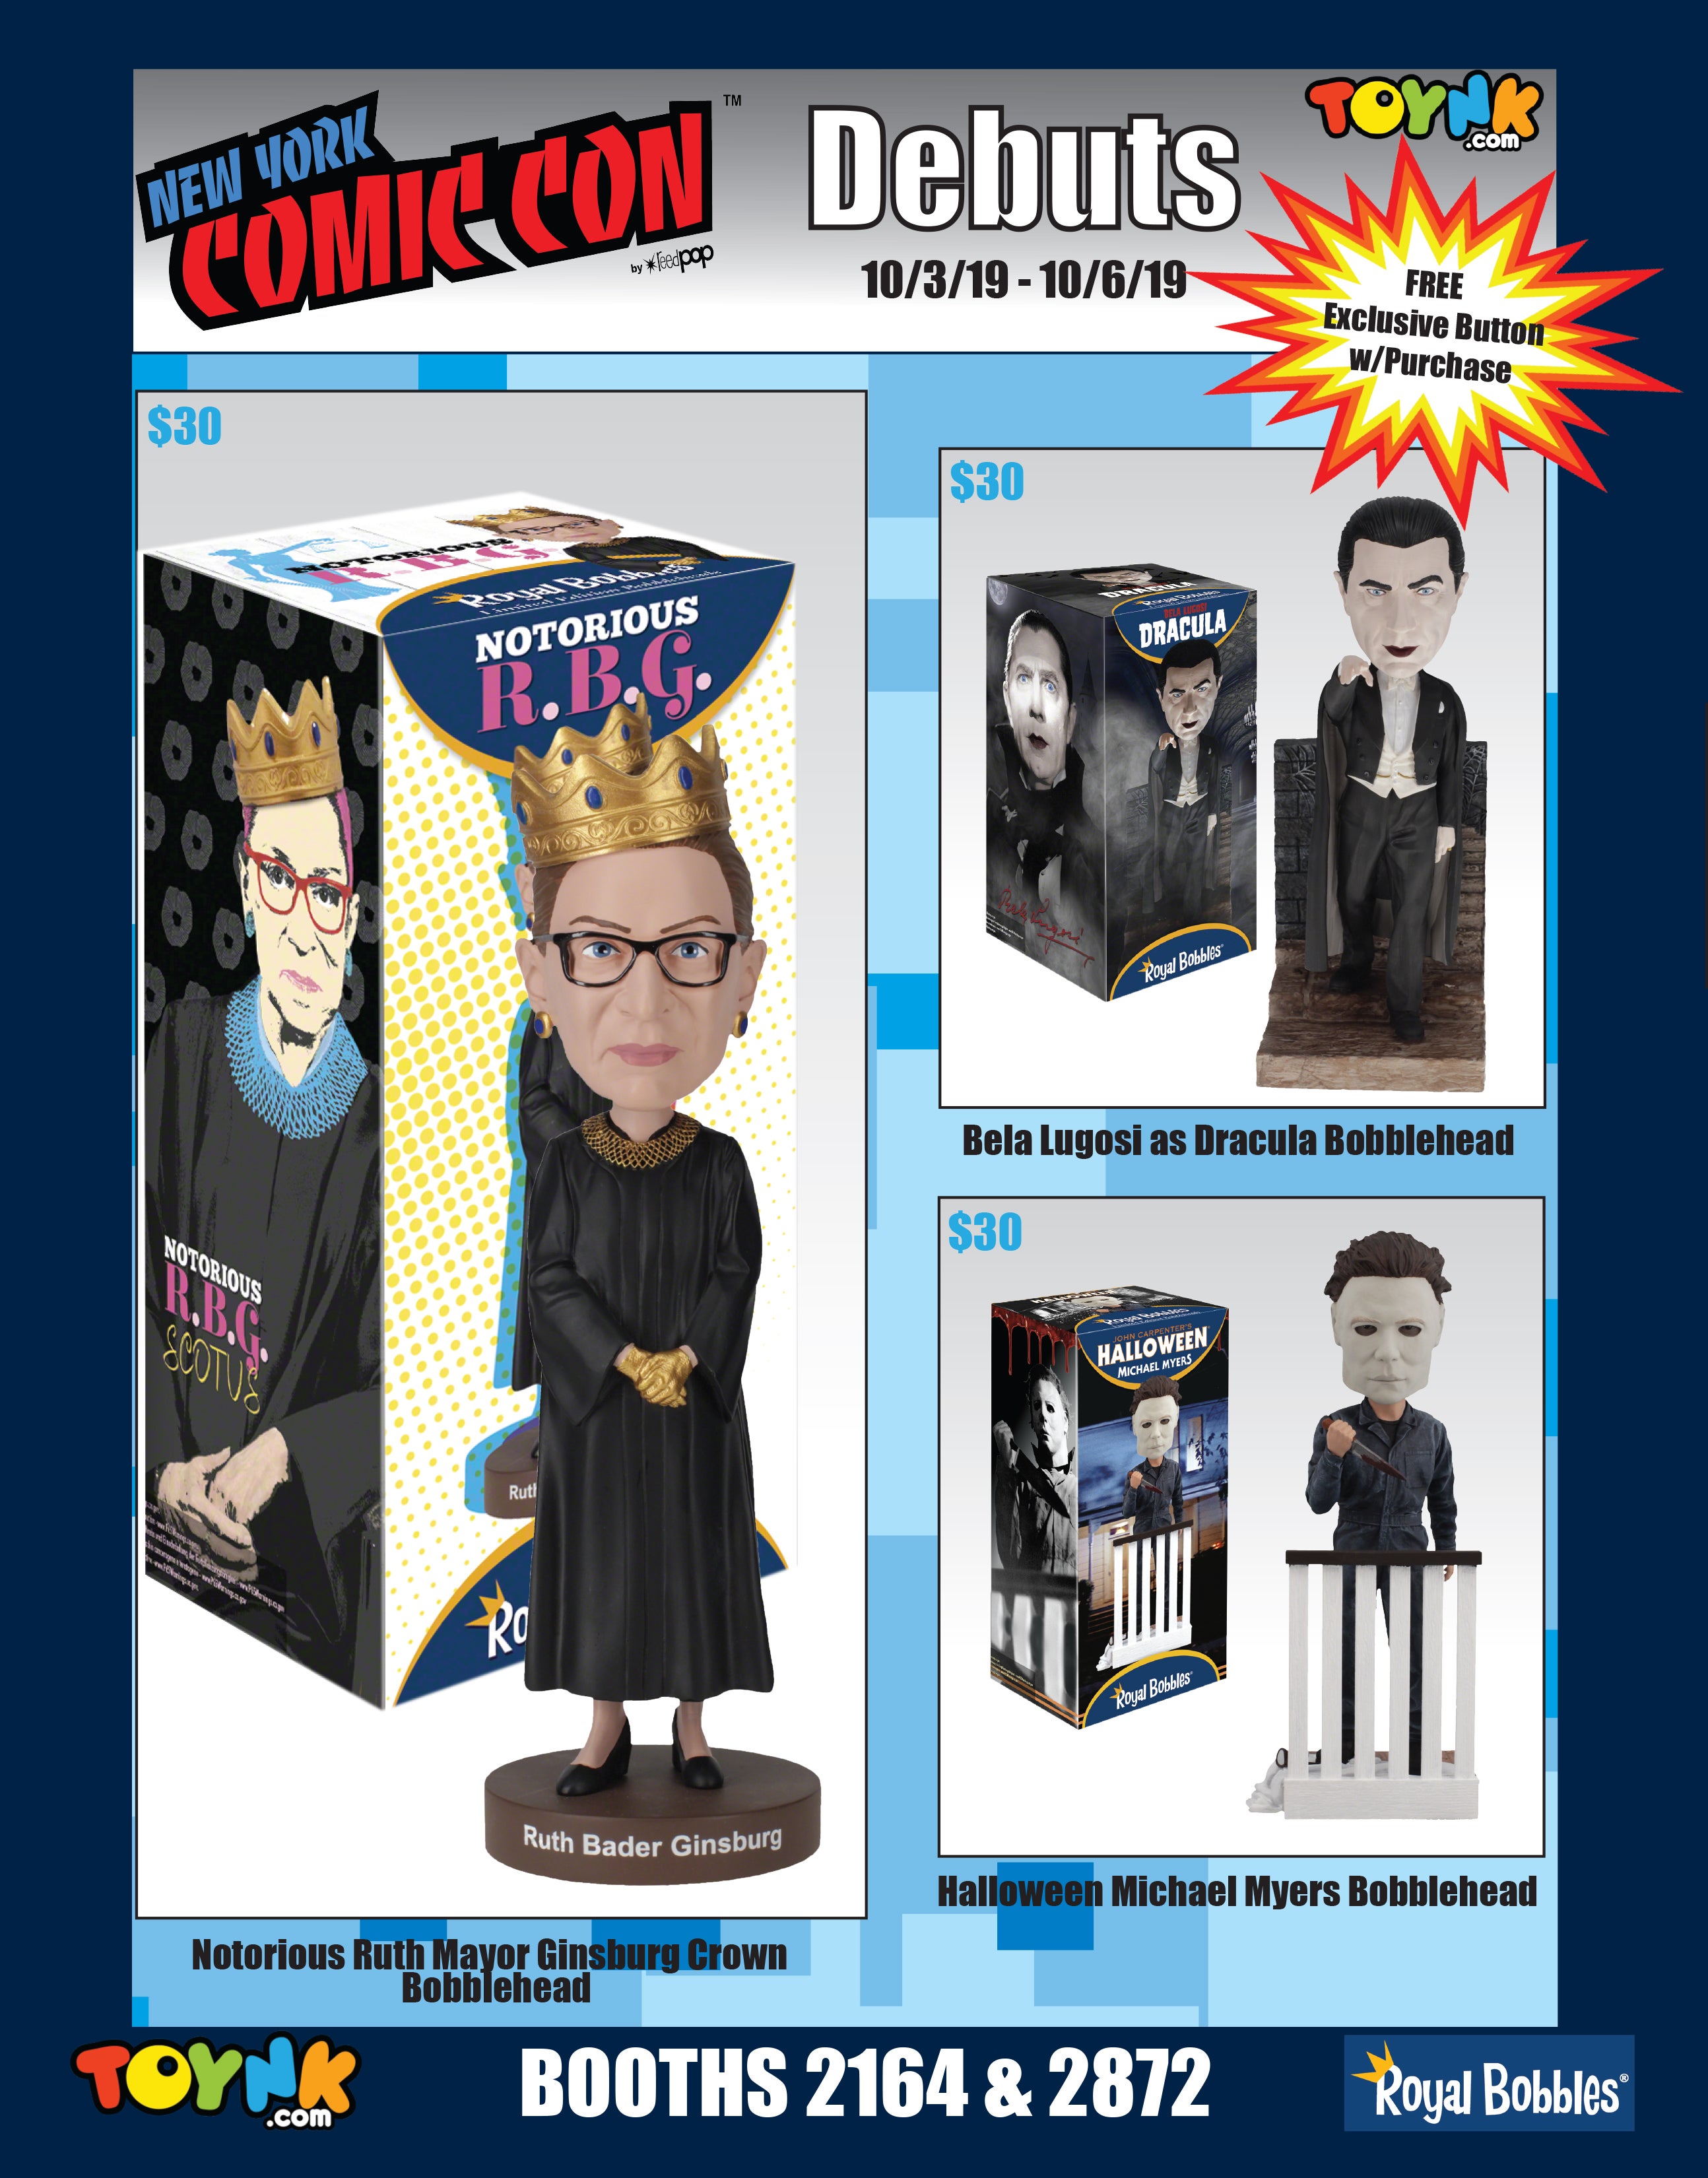 NYCC19 Exclusives PAGE 4 BOBBLEHEADS